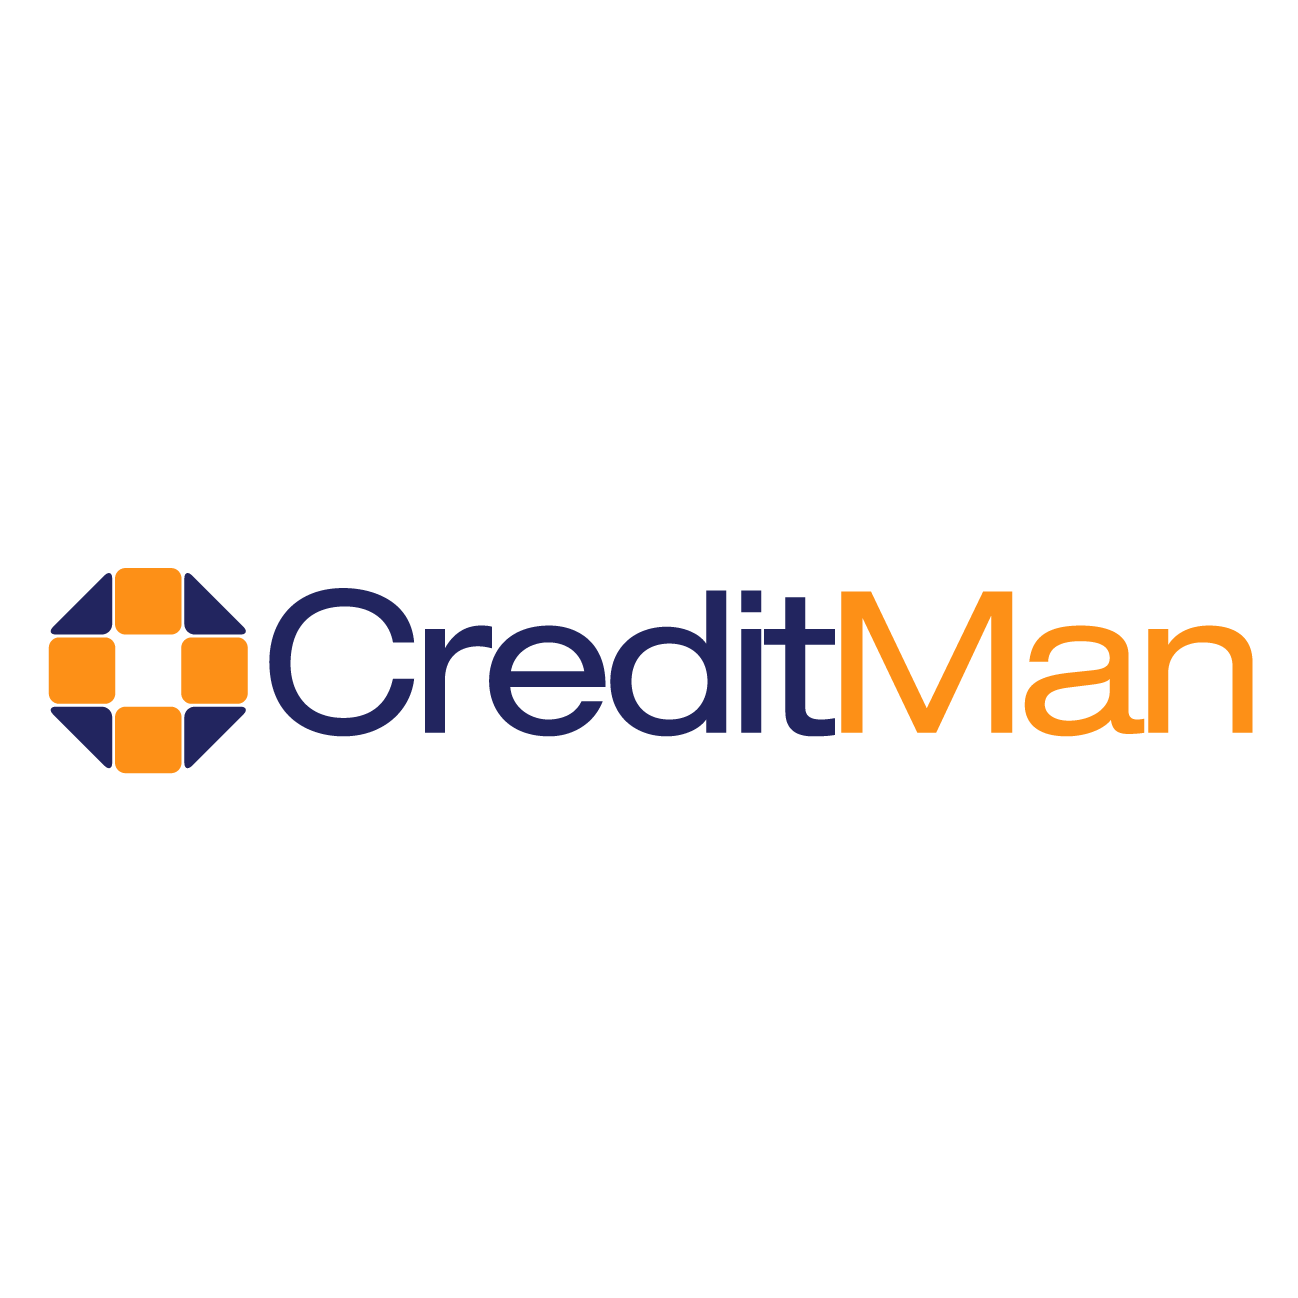 The UK's leading resource for Businesses and Credit Professionals